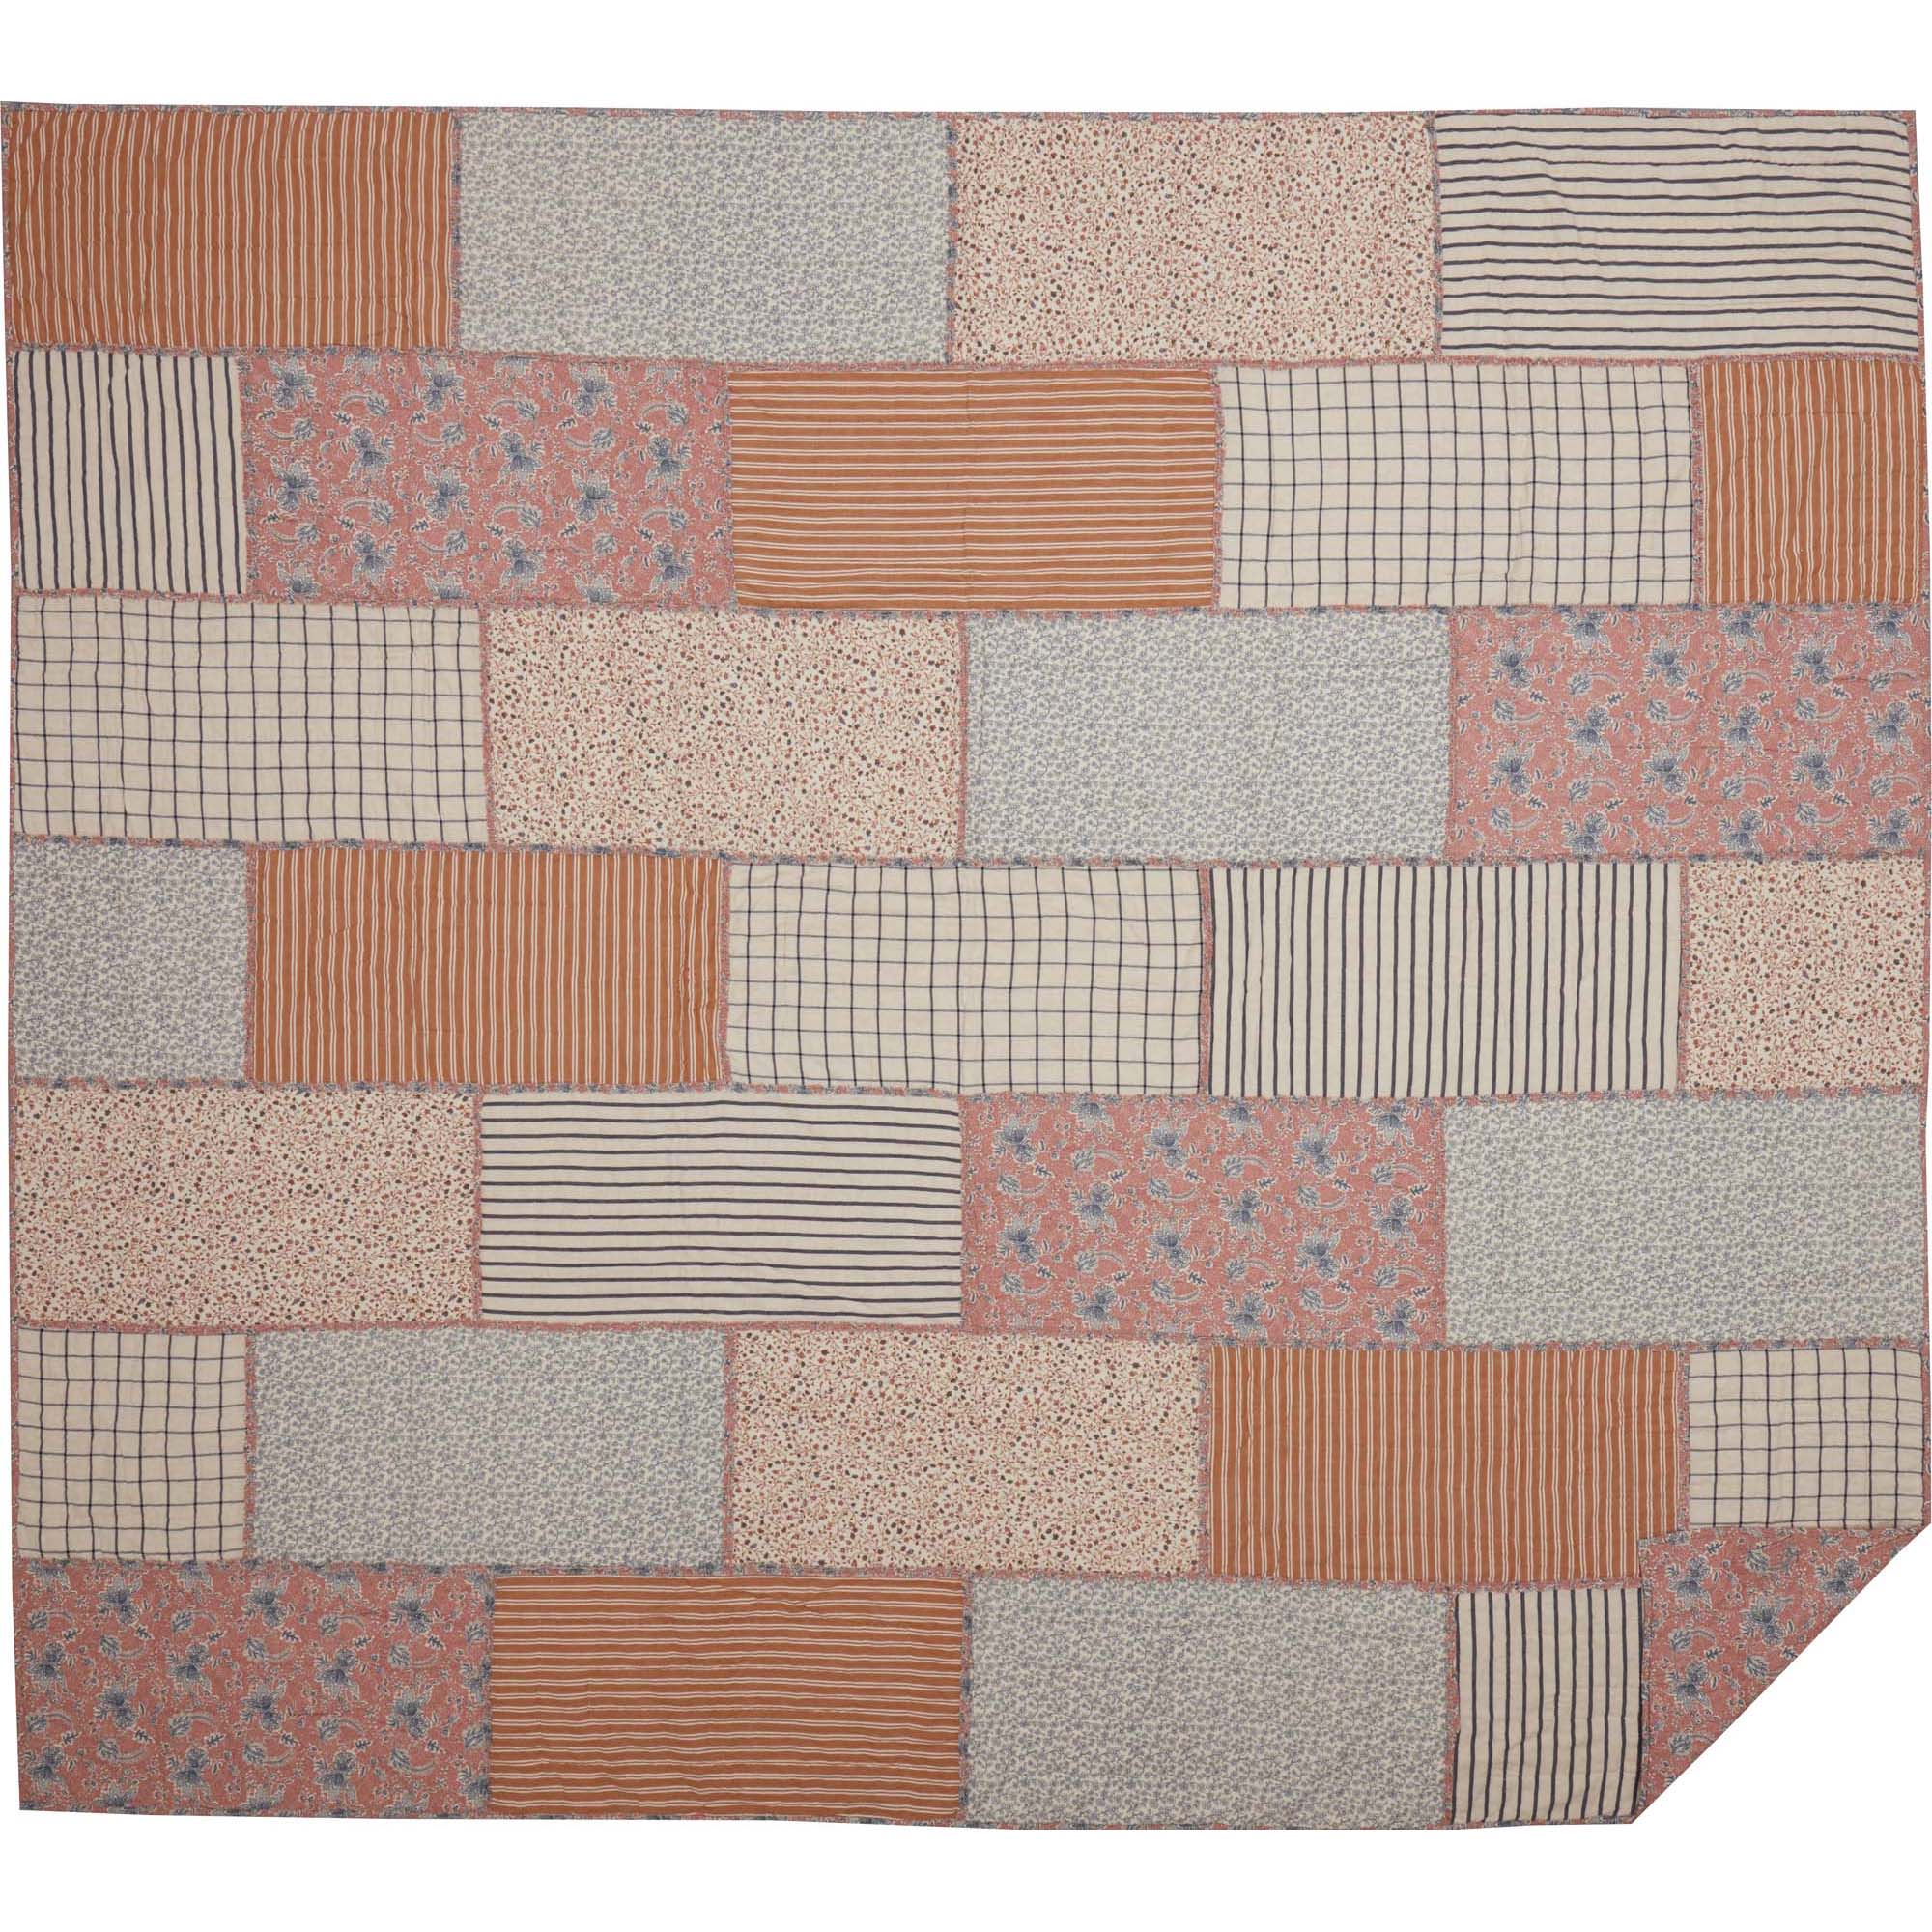 April & Olive Kaila King Quilt 105Wx95L By VHC Brands